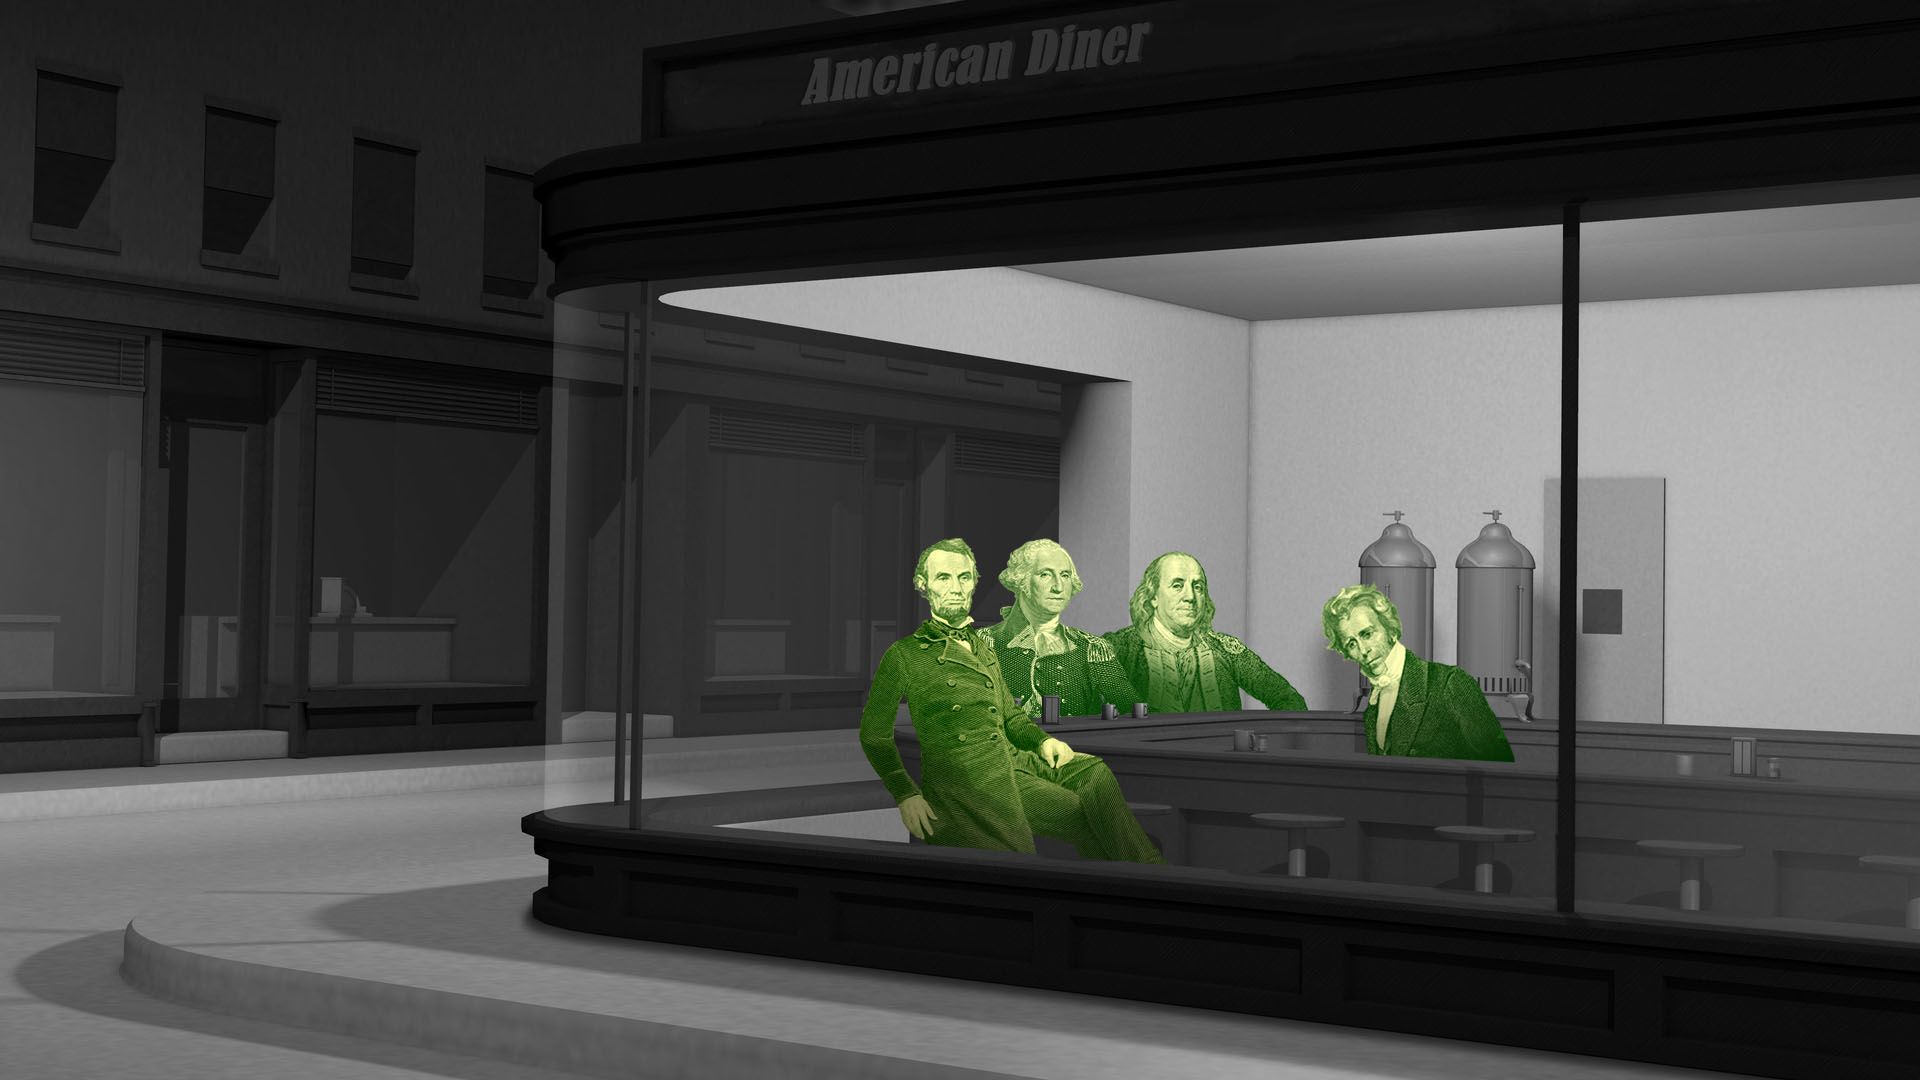 Illustration of monetary-renderings of Presidents Lincoln, Jackson, and Washington, and Benjamin Franklin, in the Nighthawks painting